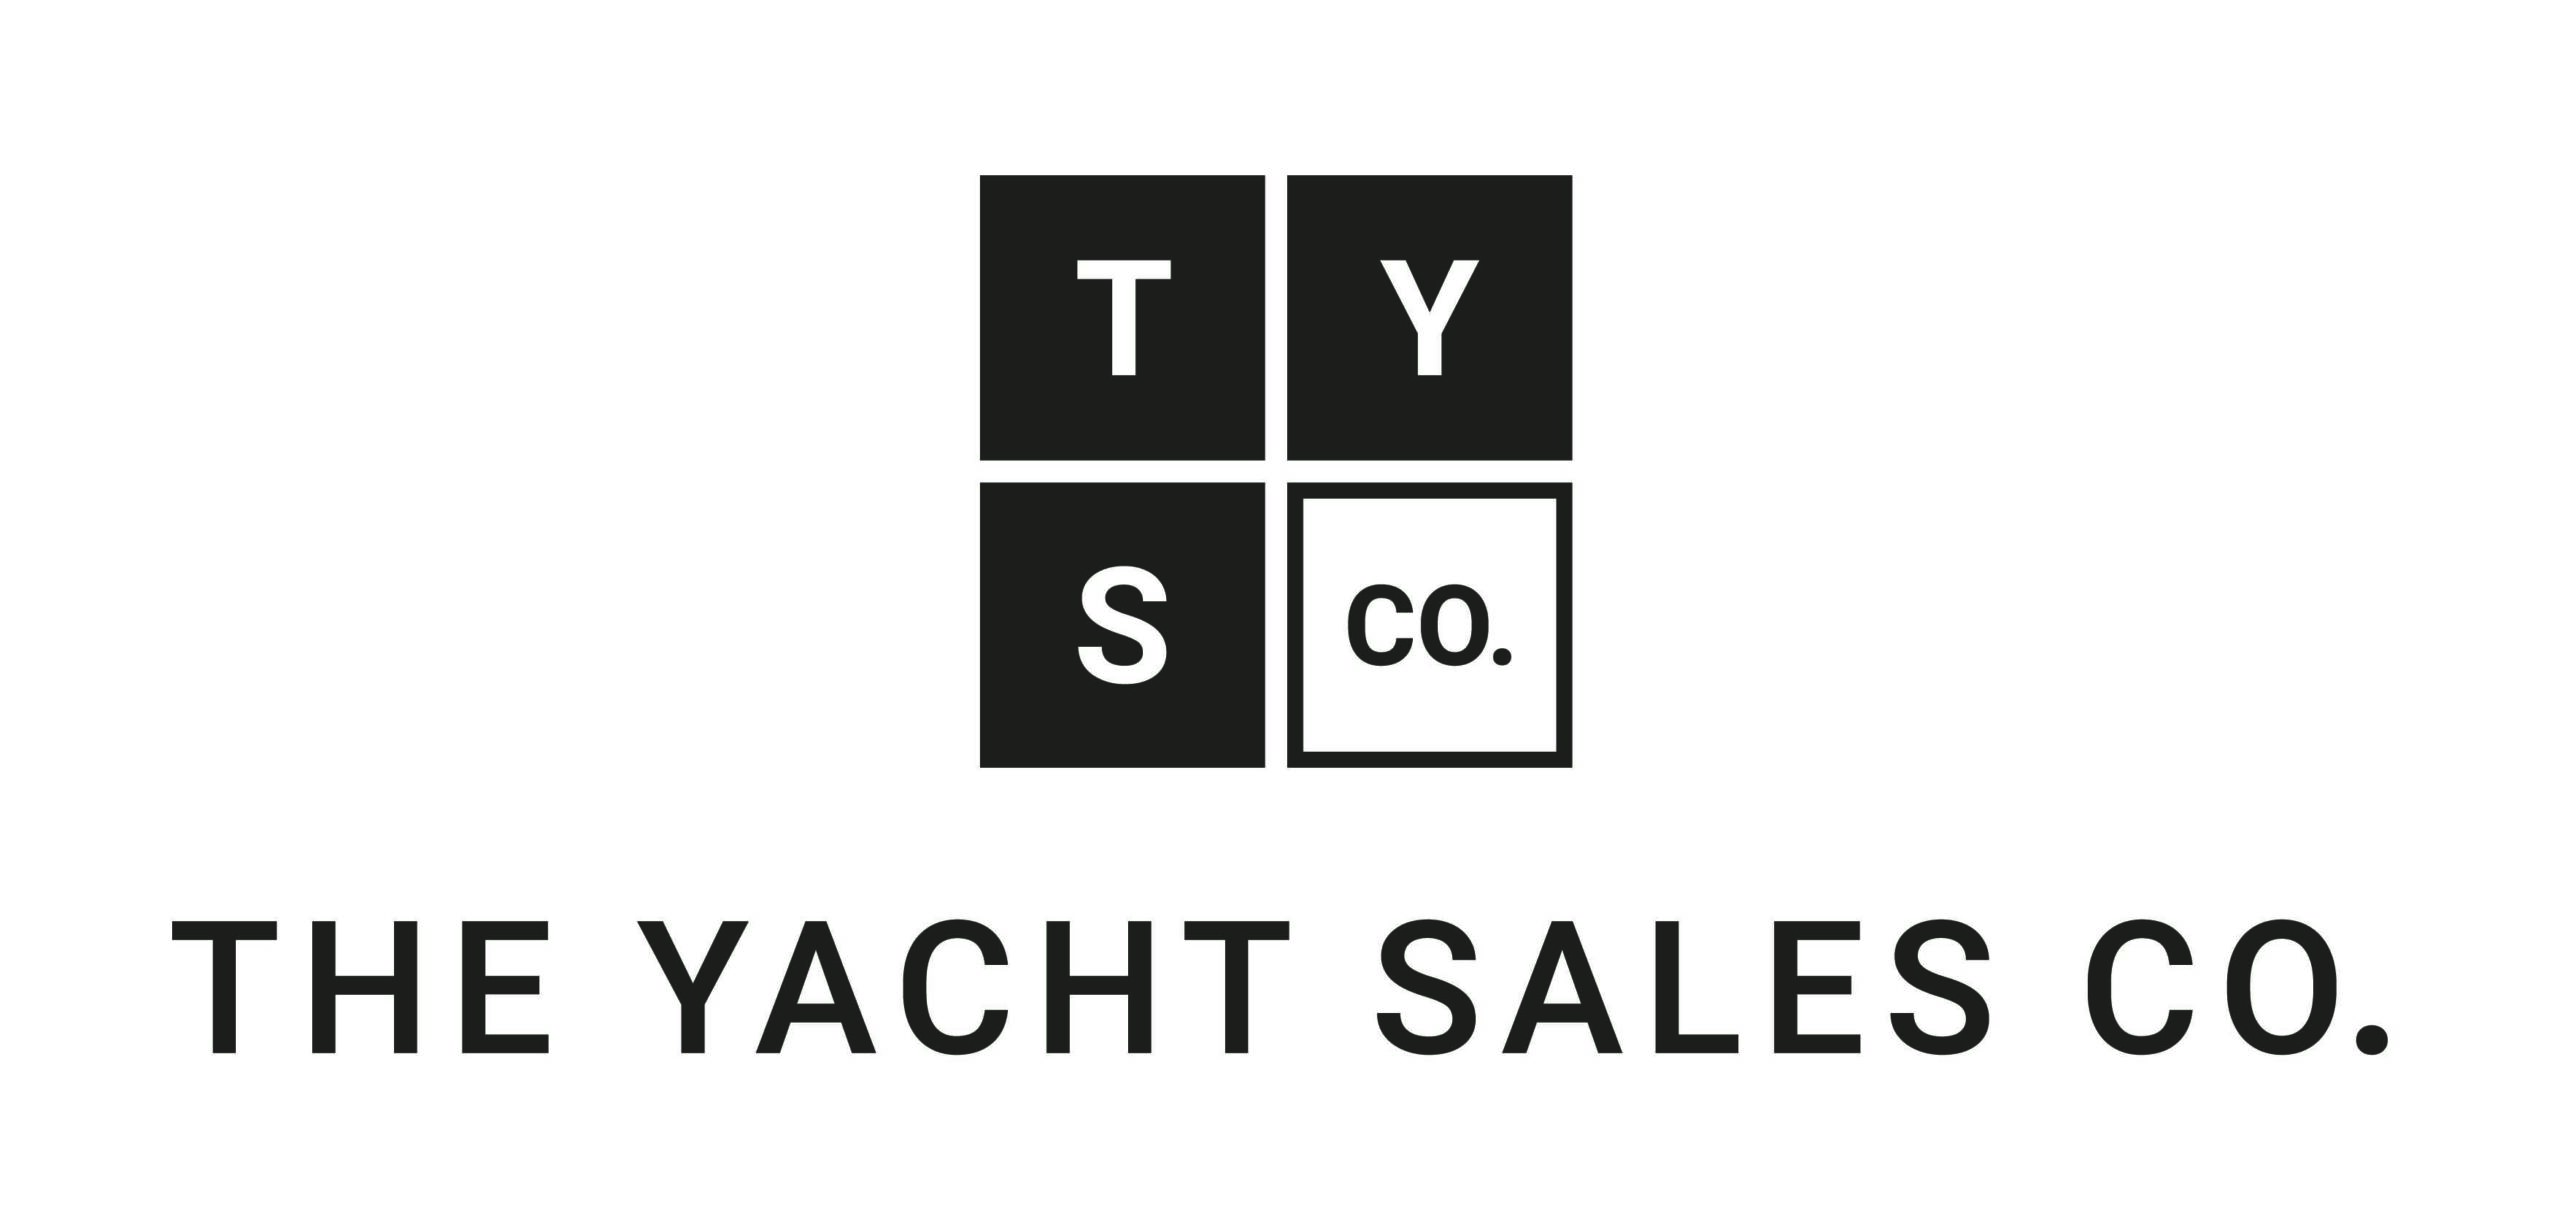 The Yacht Sale Company Exhibitor at the Thailand International Boat Show